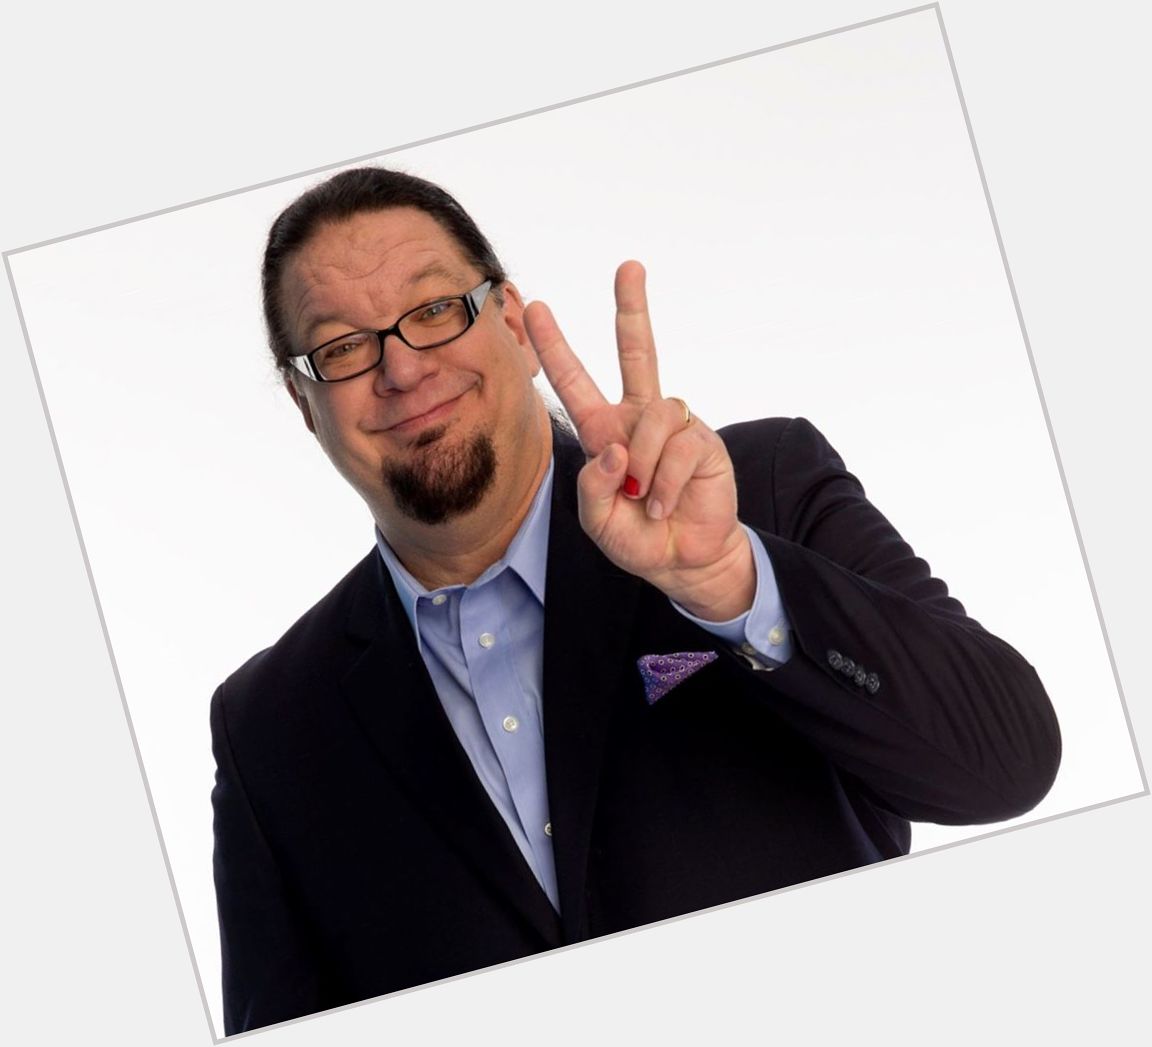 Happy Birthday to Penn Jillette who turns 65 today! 